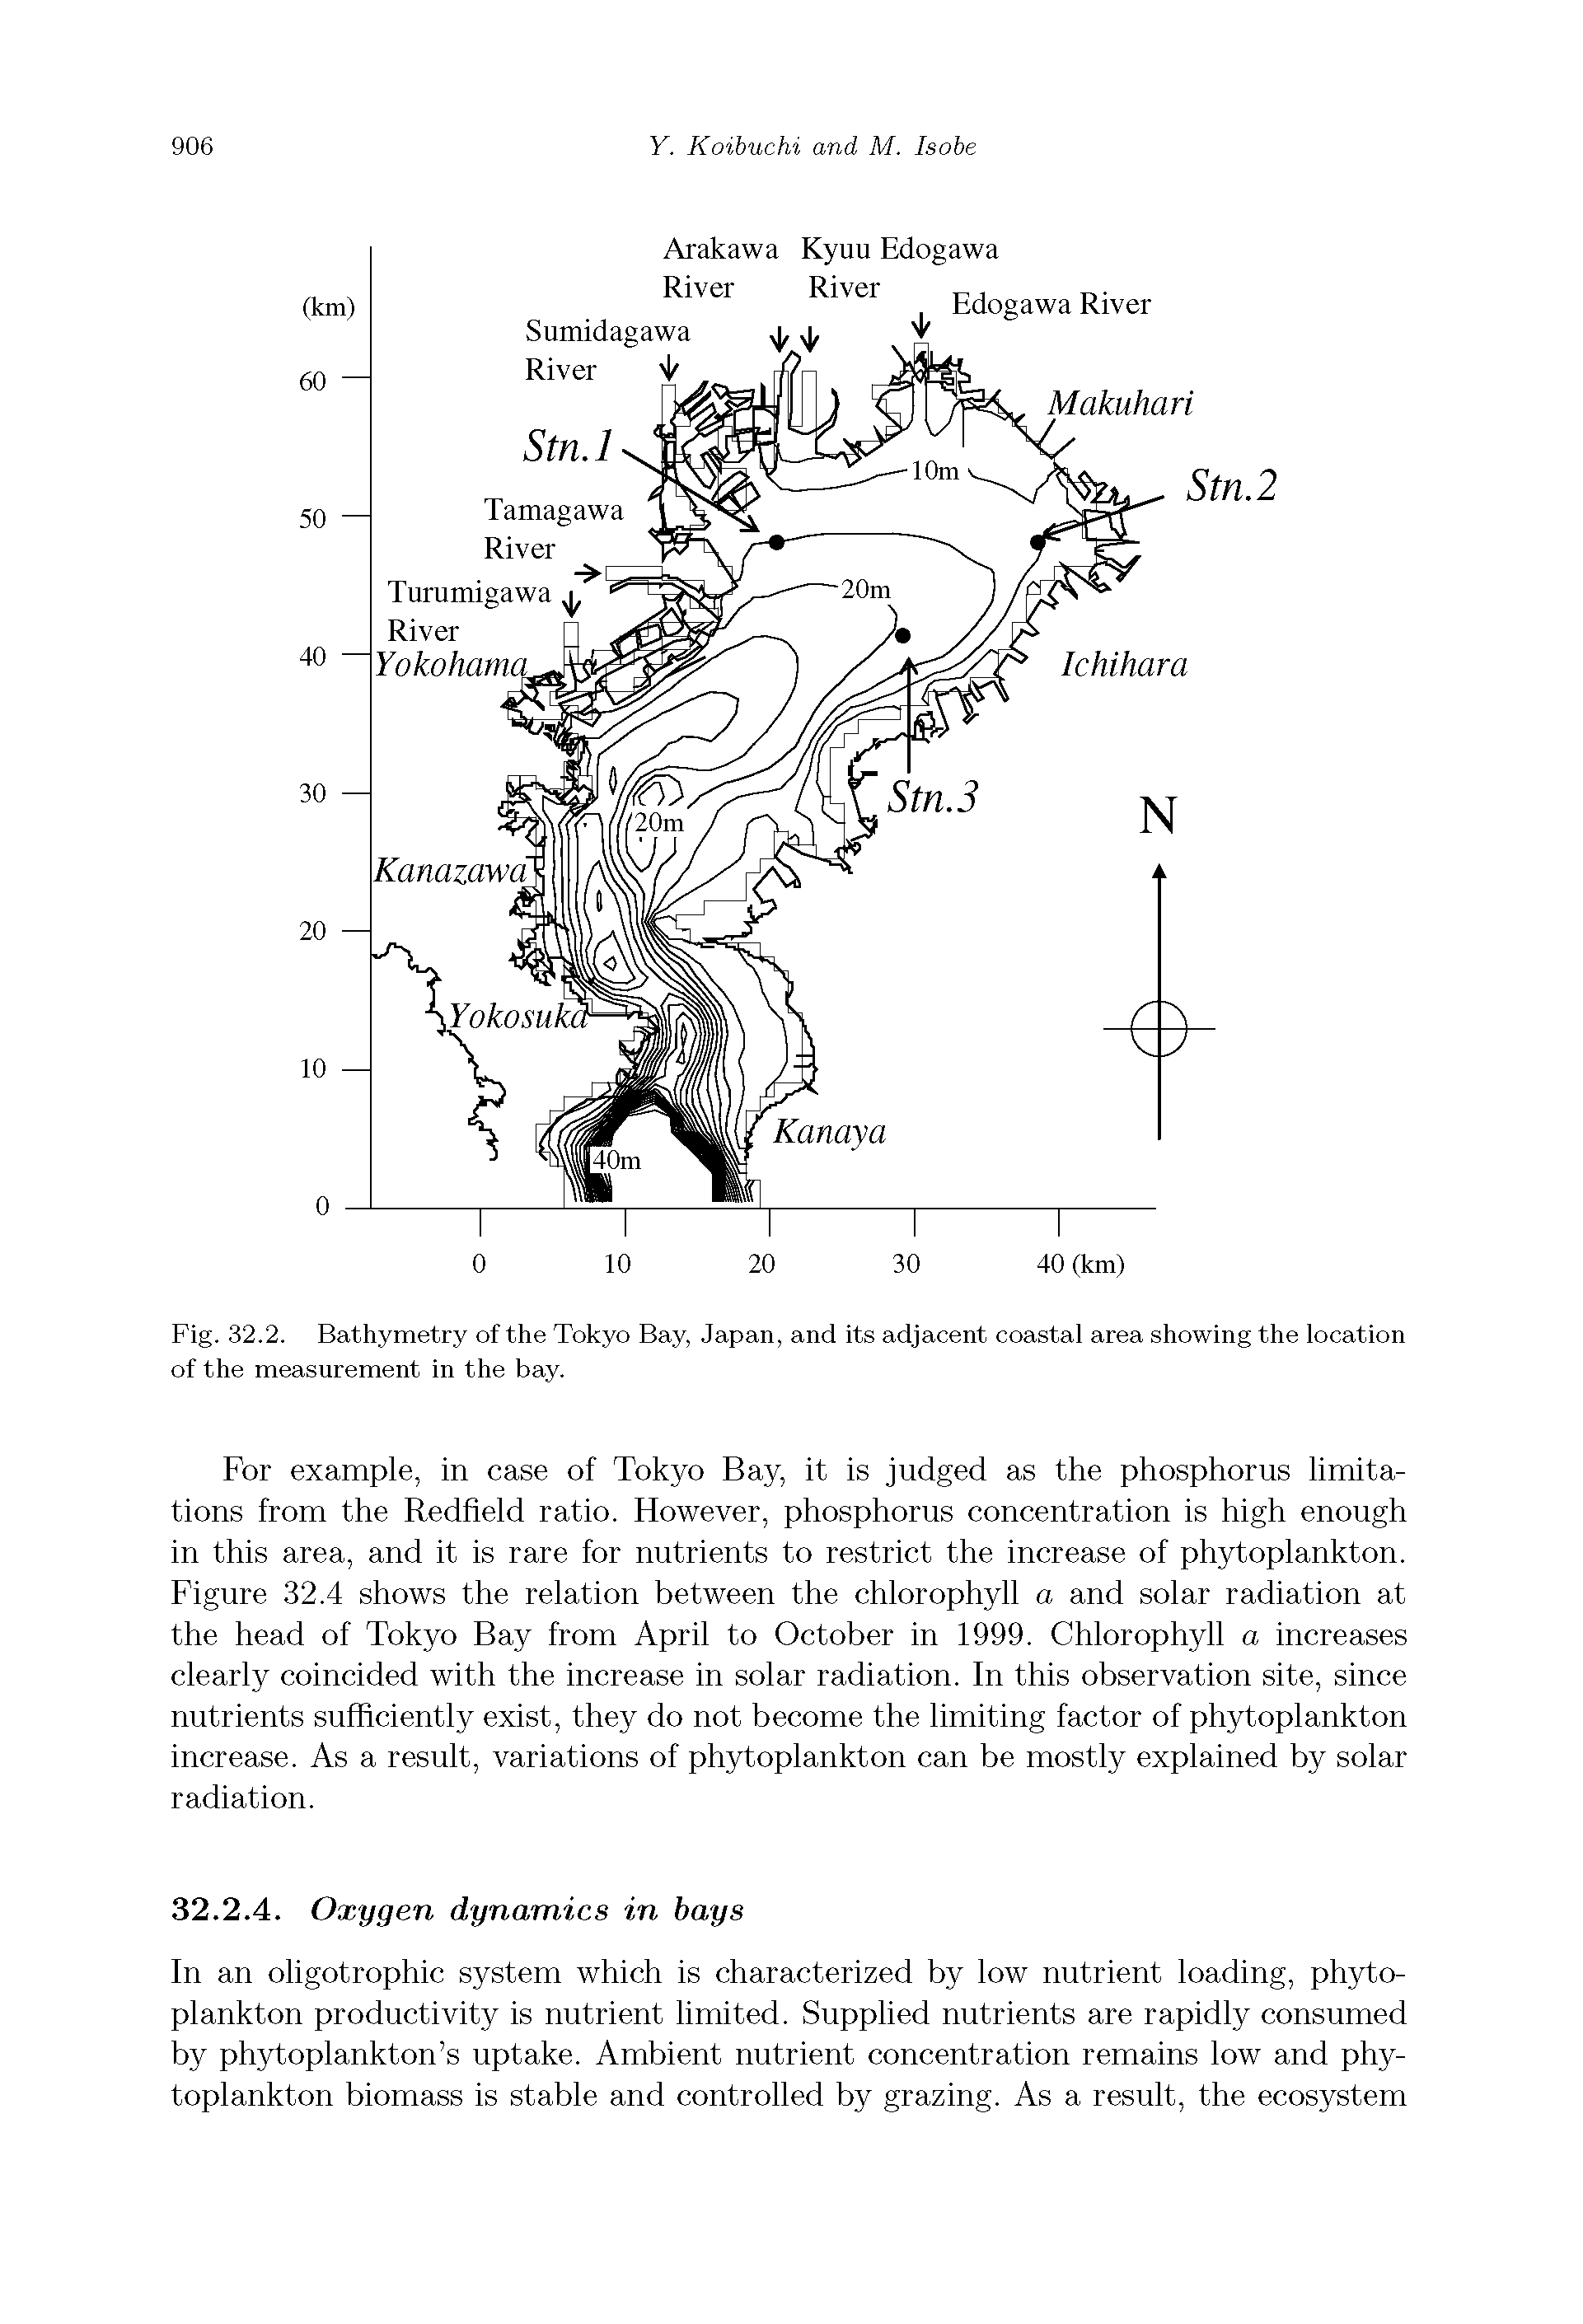 Fig. 32.2. Bathymetry of the Tokyo Bay, Japan, and its adjacent coastal area showing the location of the measurement in the bay.